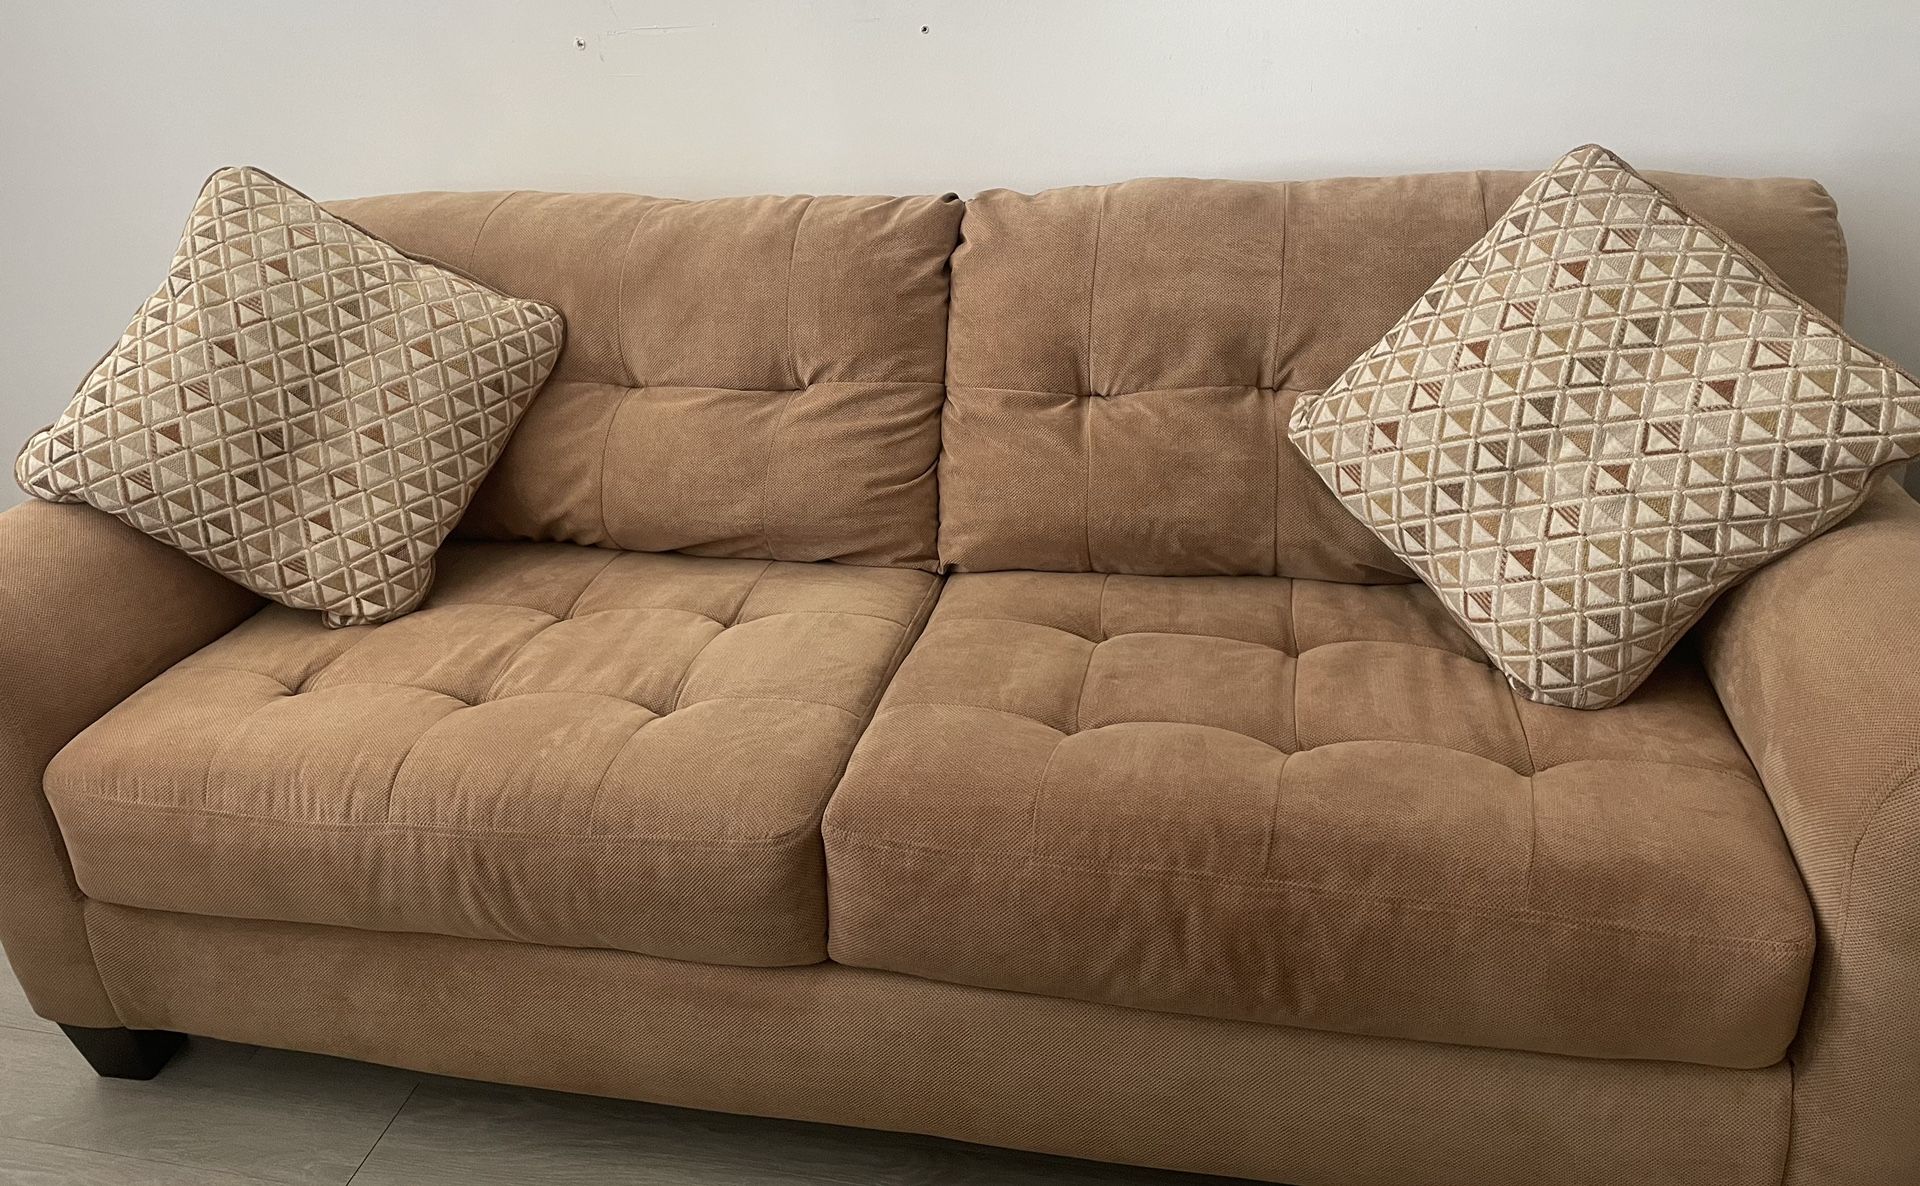  Comfy Suede Beige/ Brown Couch W/ Love Seat